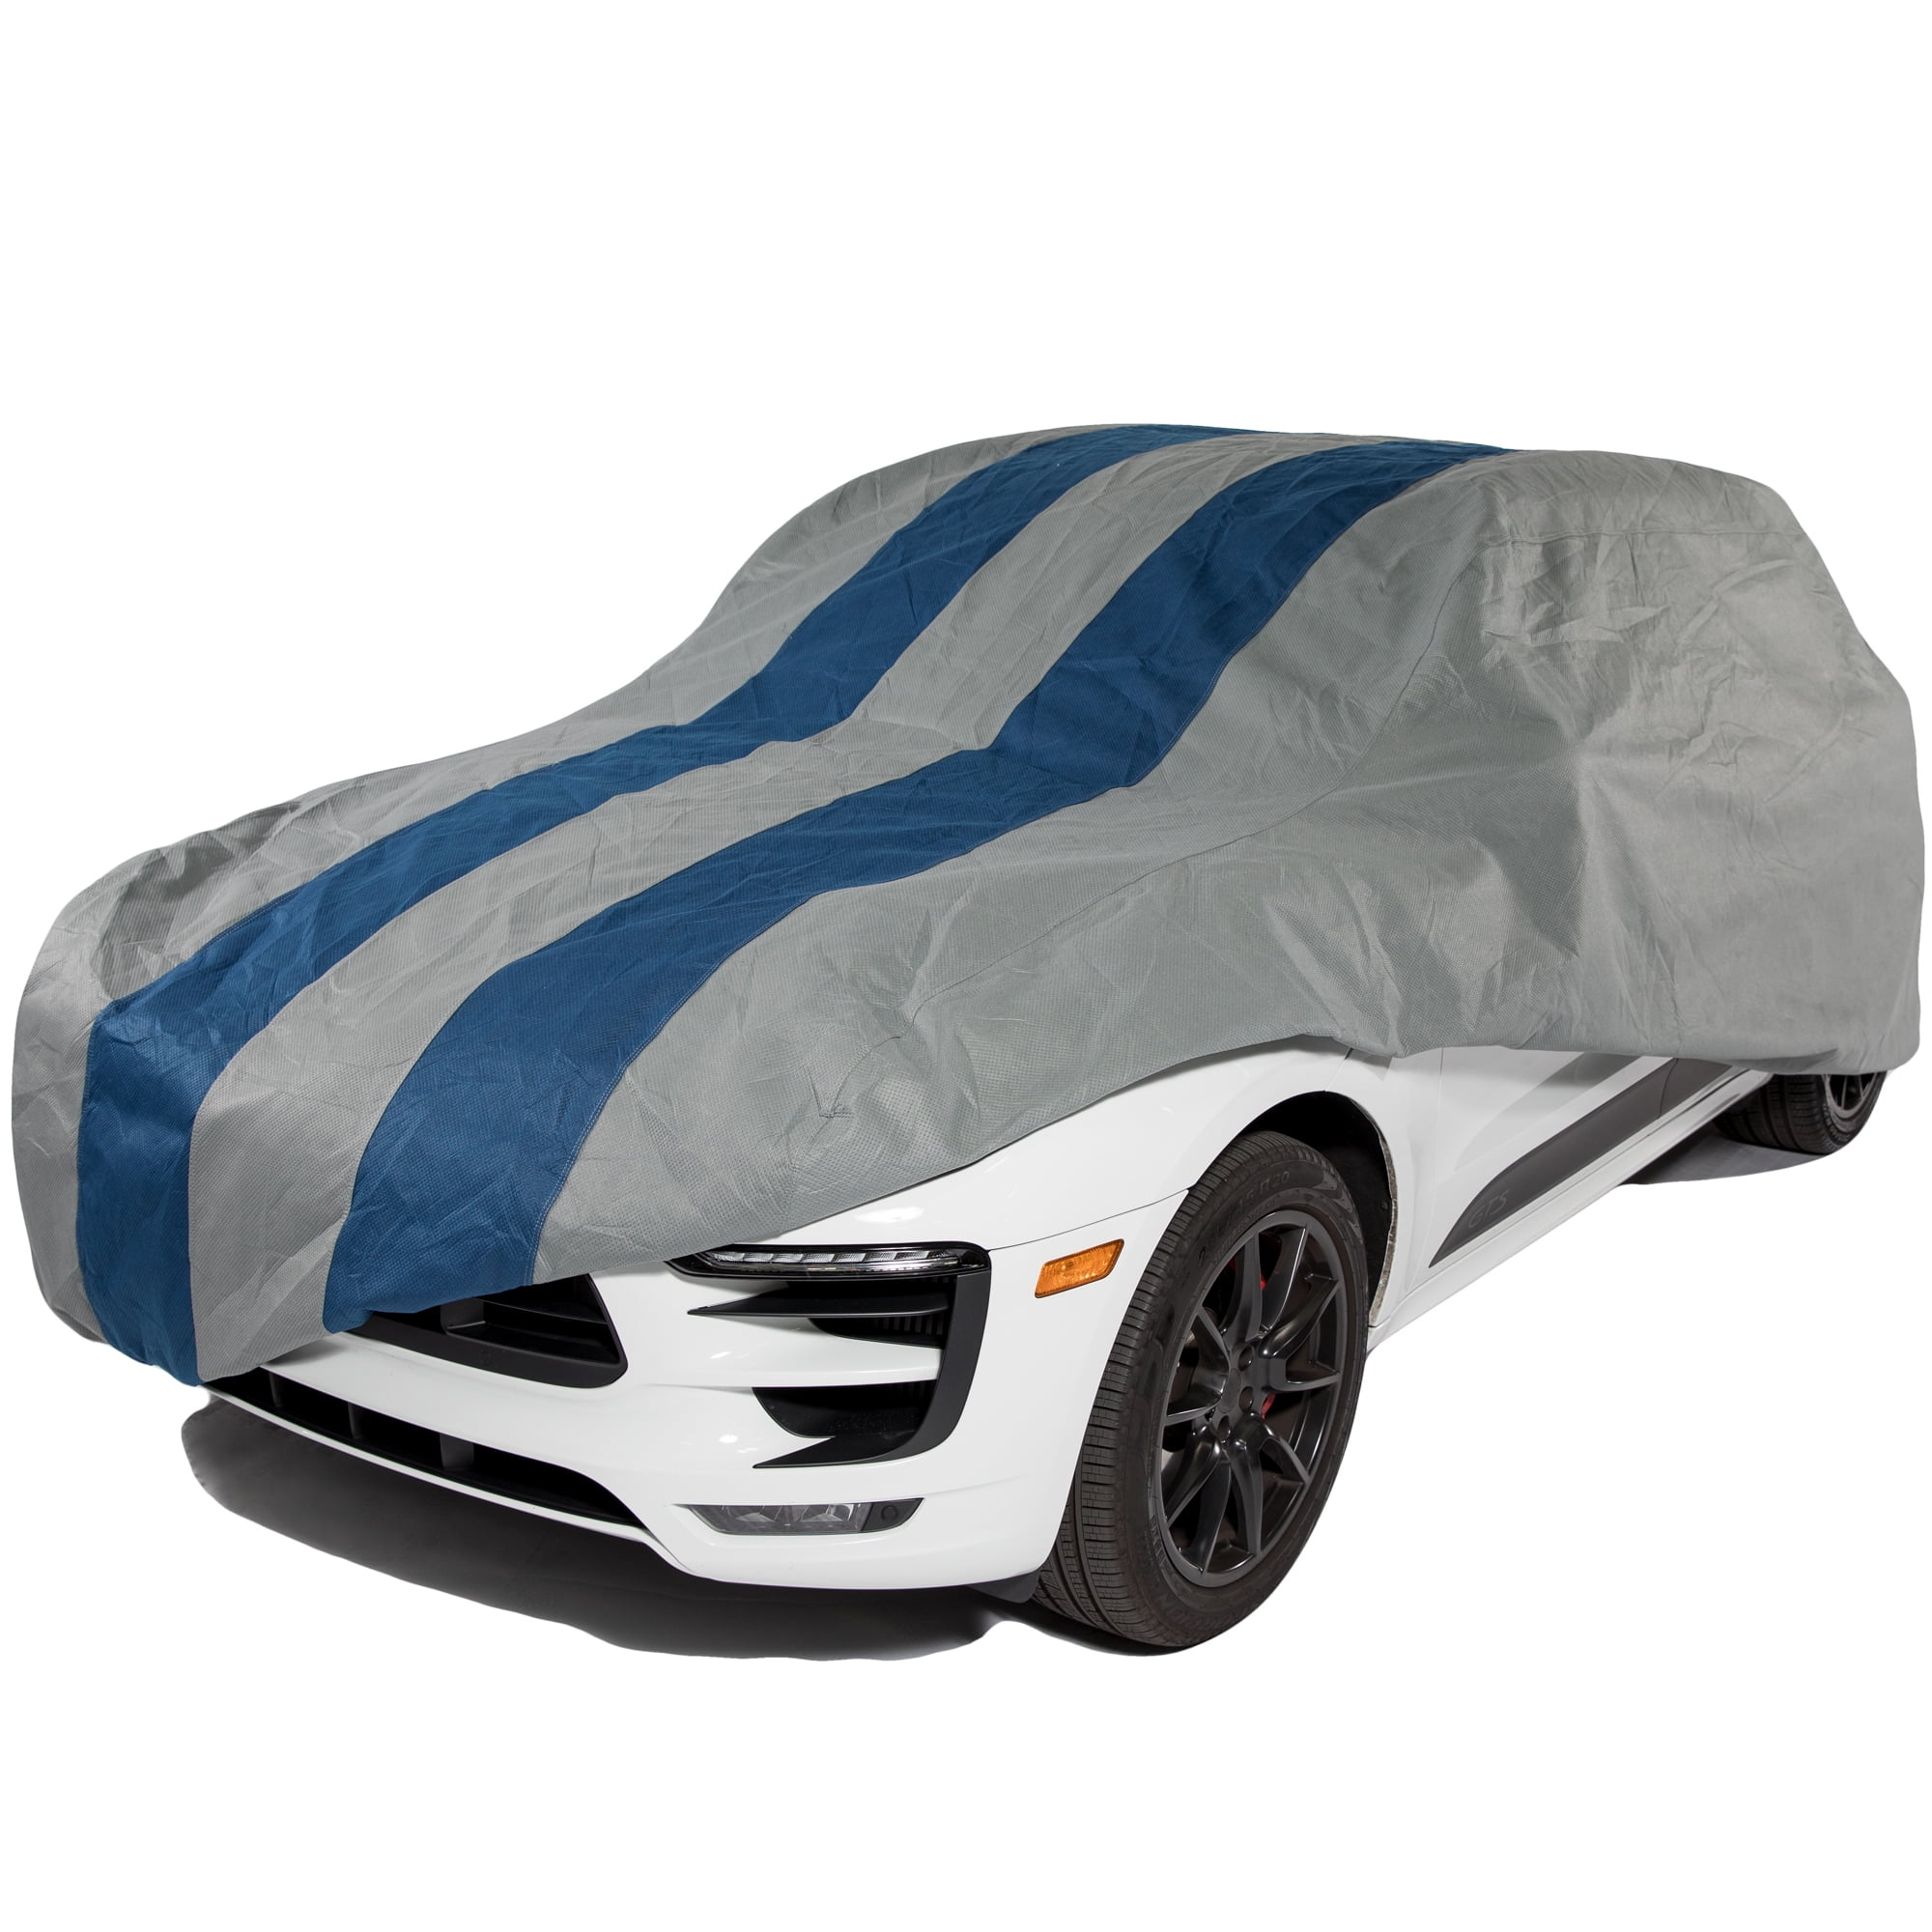 Duck Covers Weather Defender SUV Cover for SUVs/Pickup Trucks with Shell or Bed Cap up to 19 1